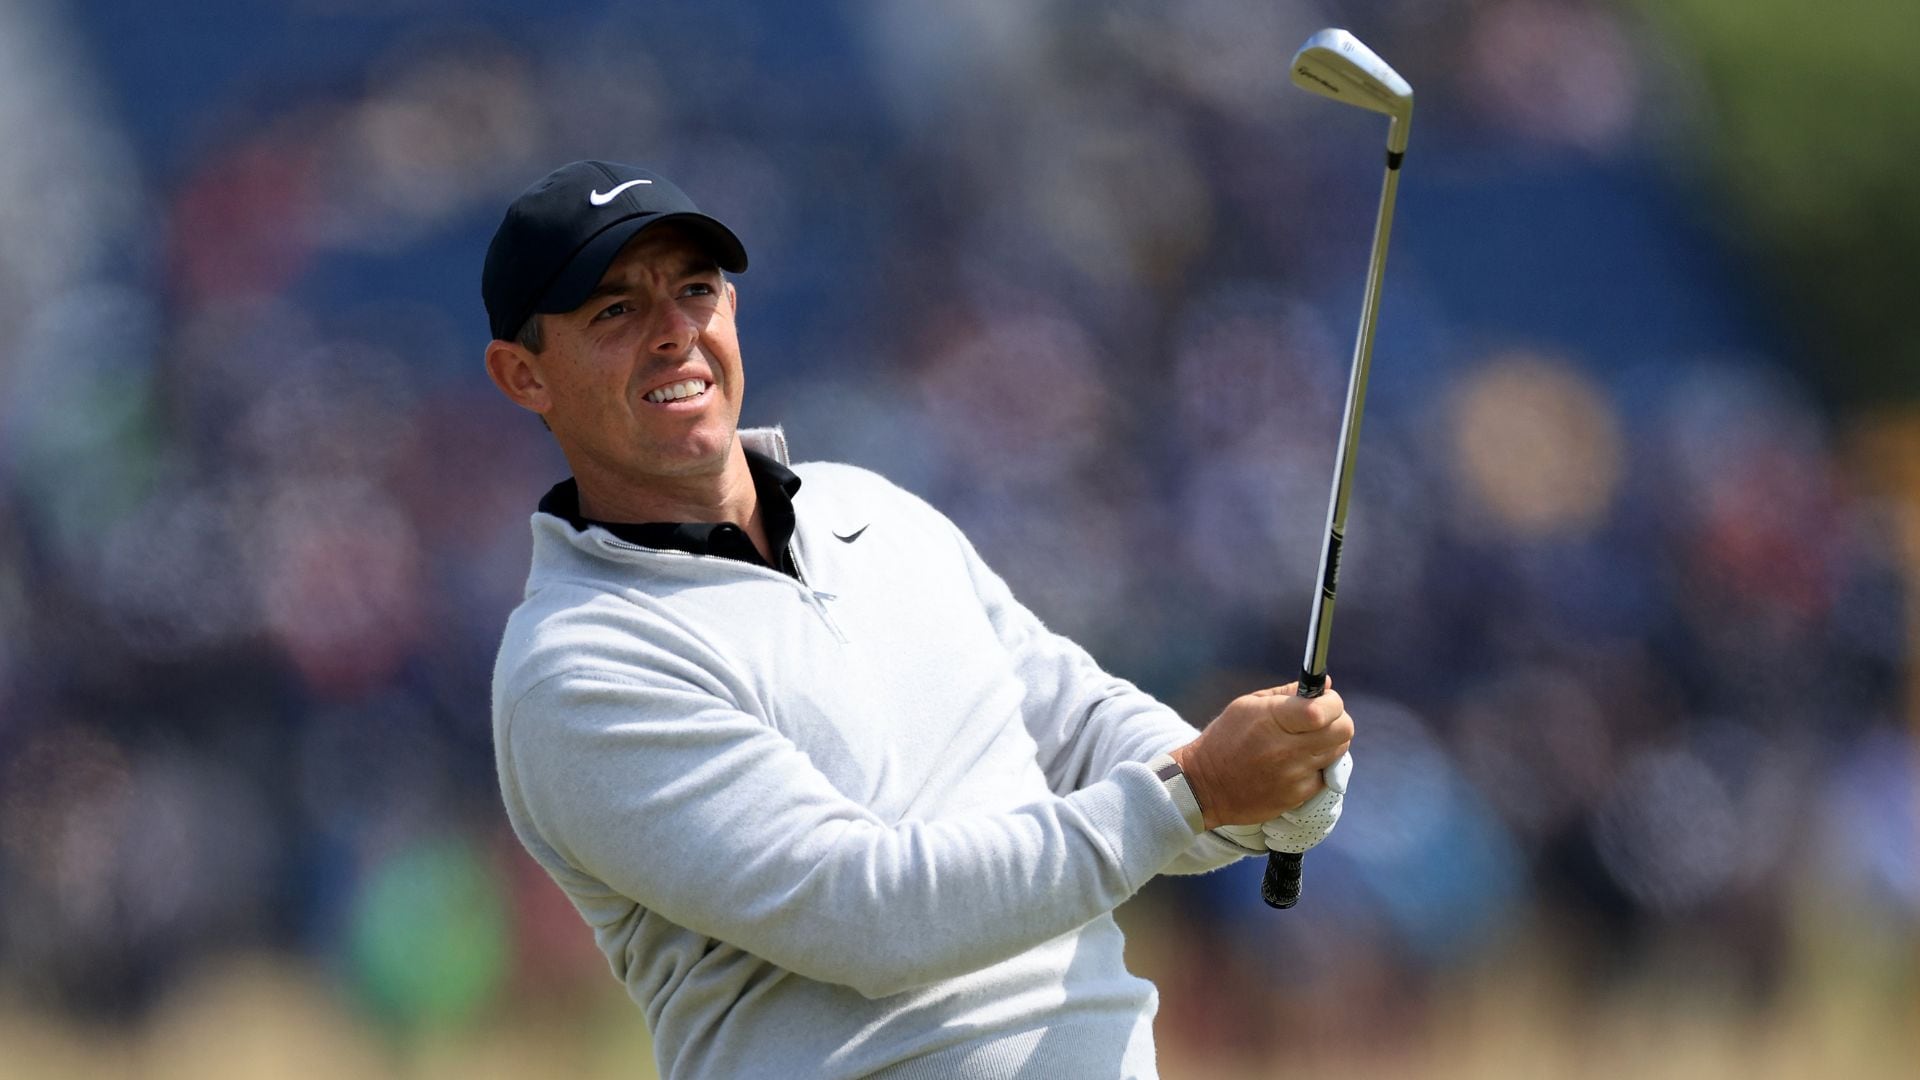 Despite being nine-strokes back, Rory McIlroy still likes his chances at the 2023 British Open